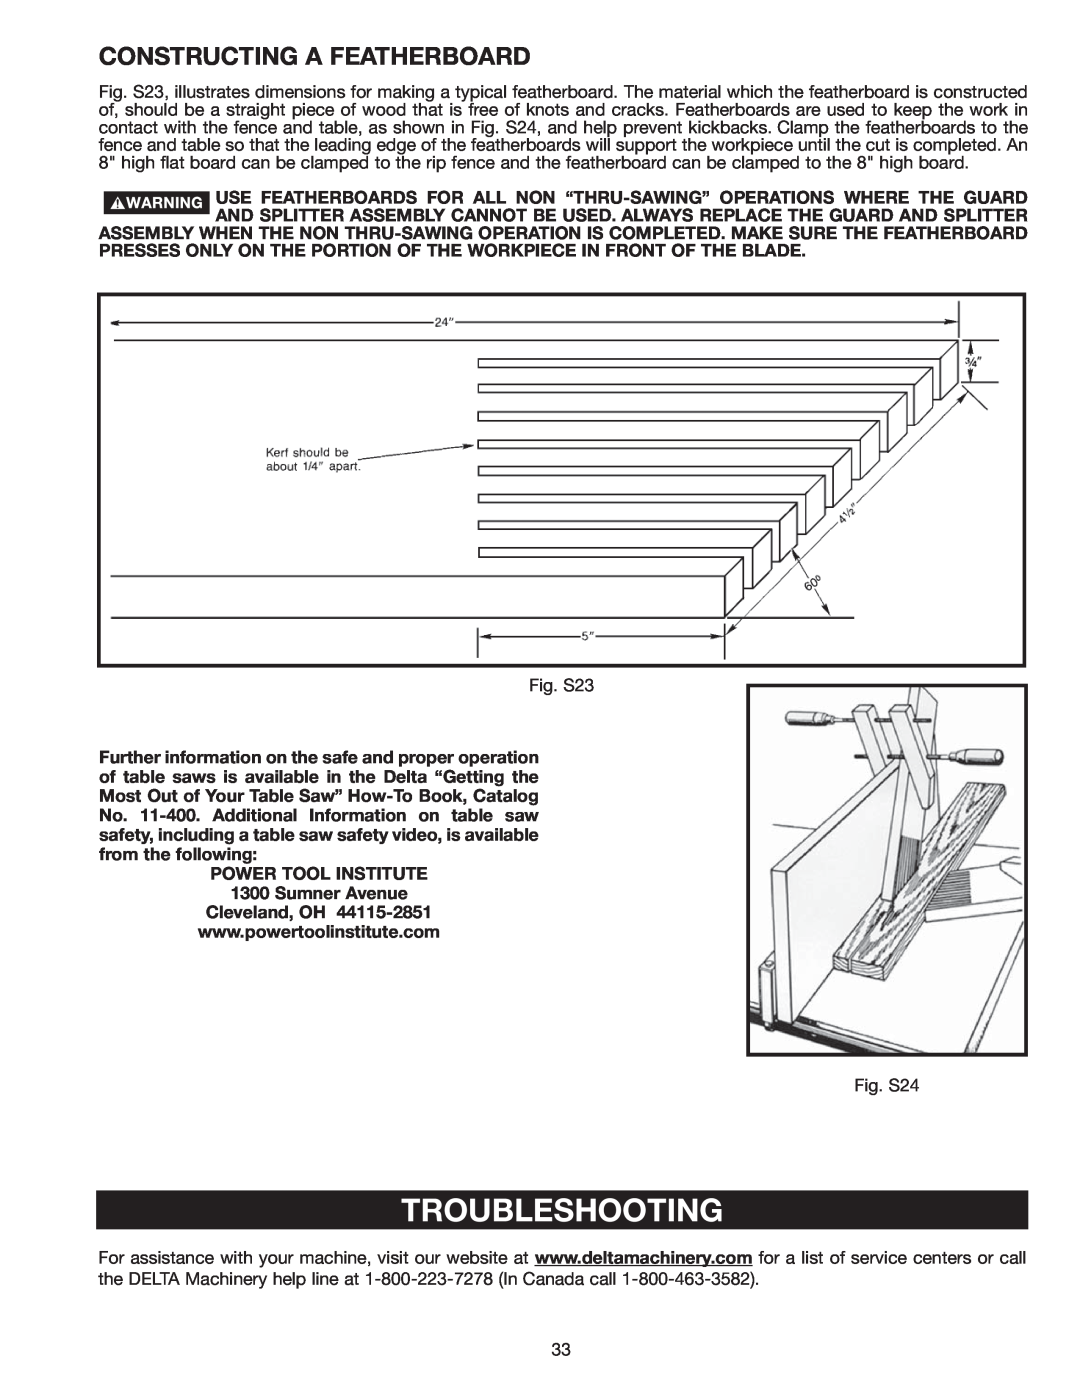 Delta 36-978 instruction manual Troubleshooting, Constructing A Featherboard 